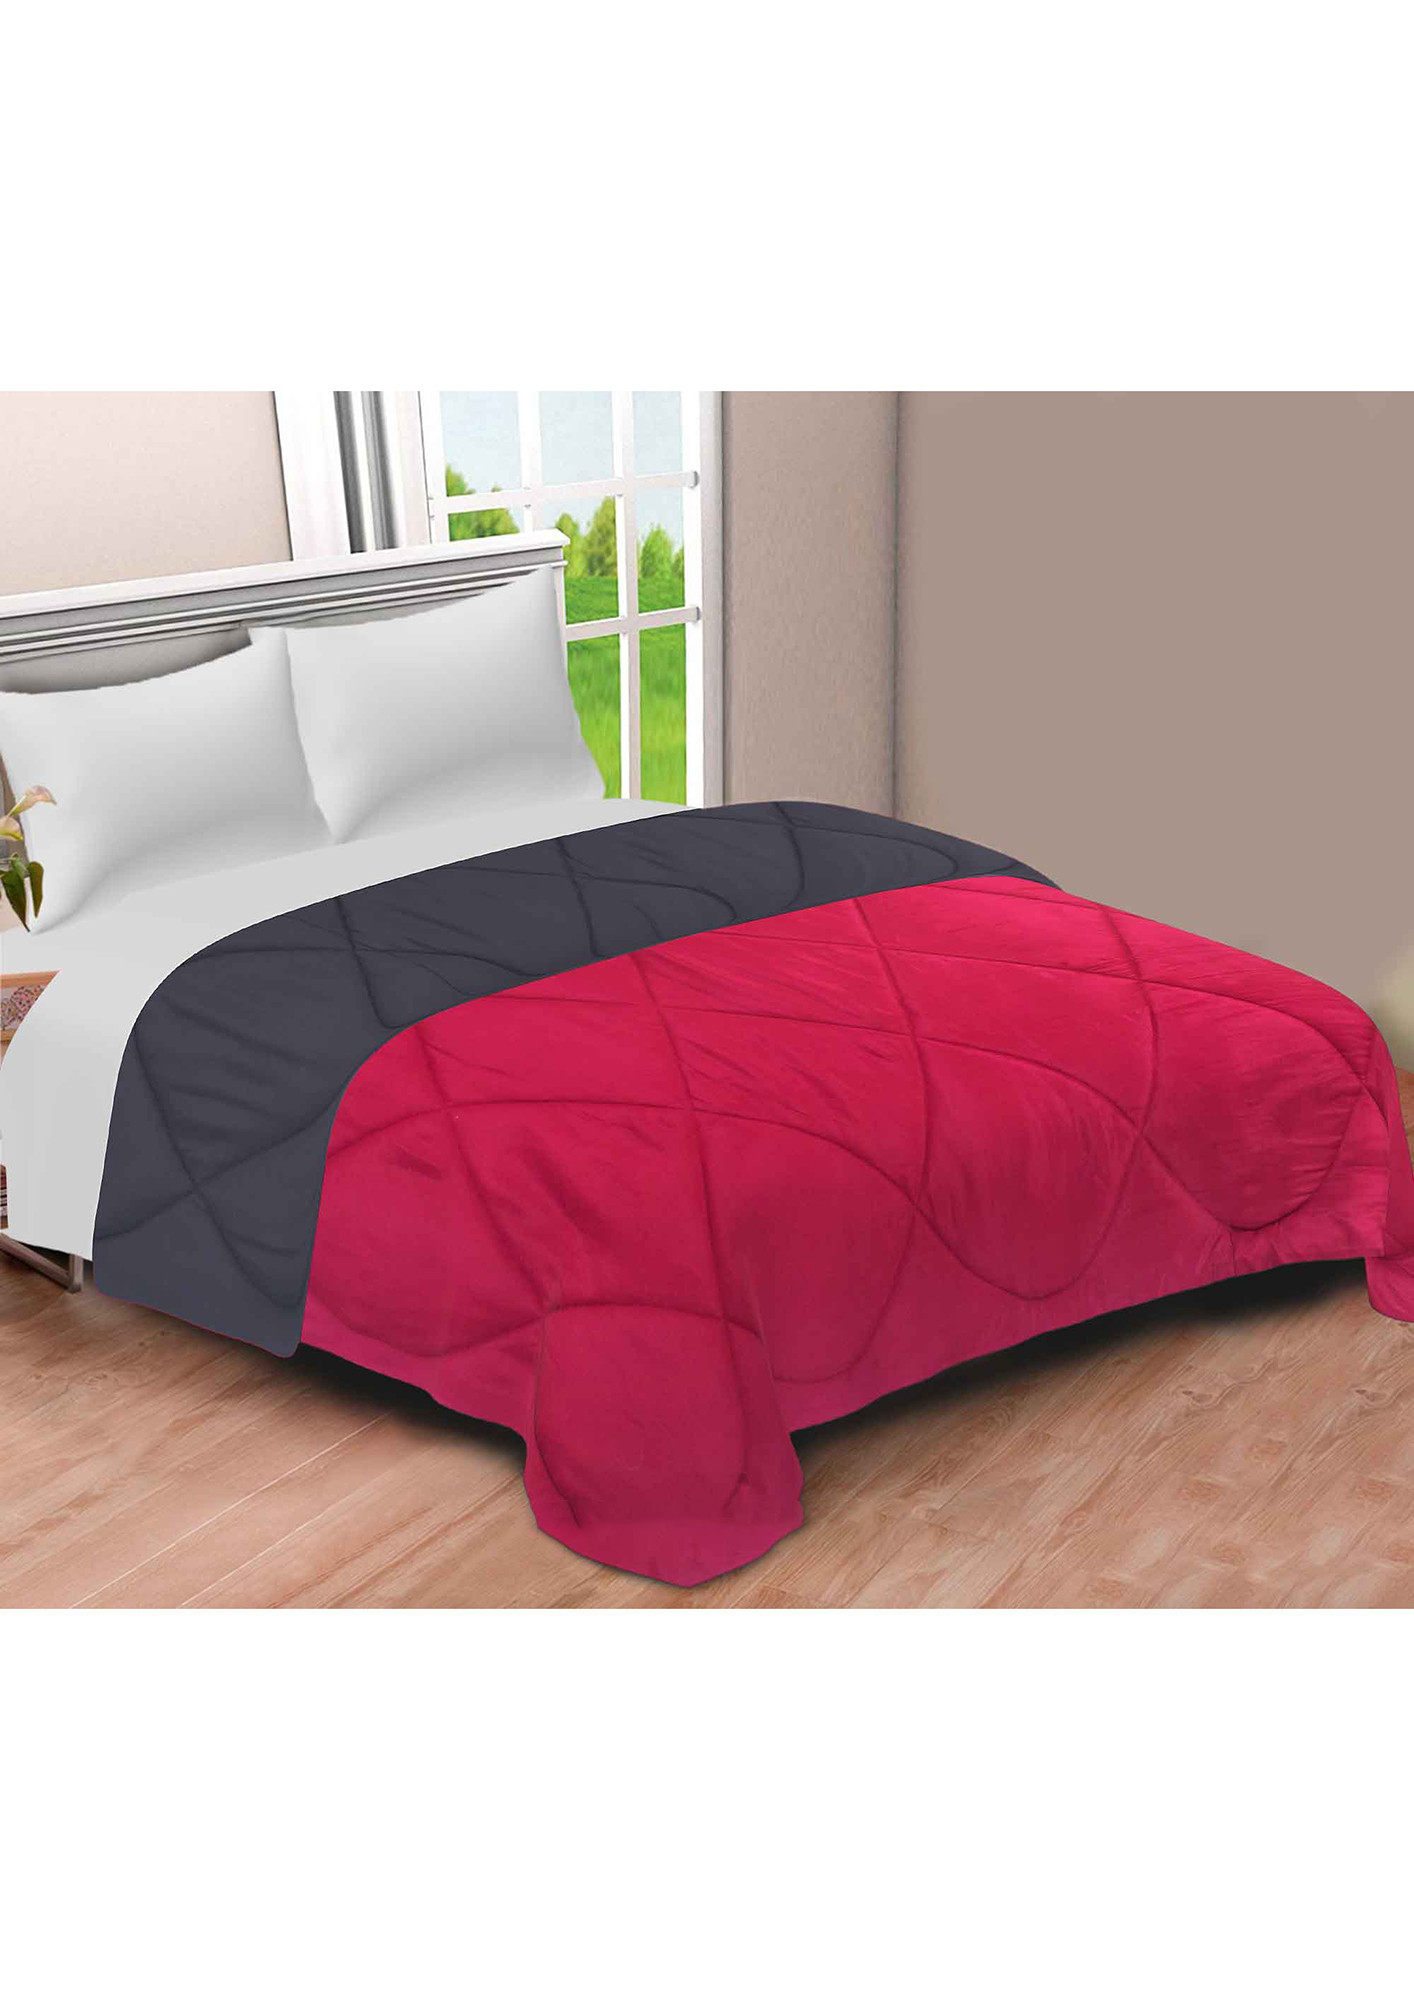 Red-Grey Double Bed Comforter